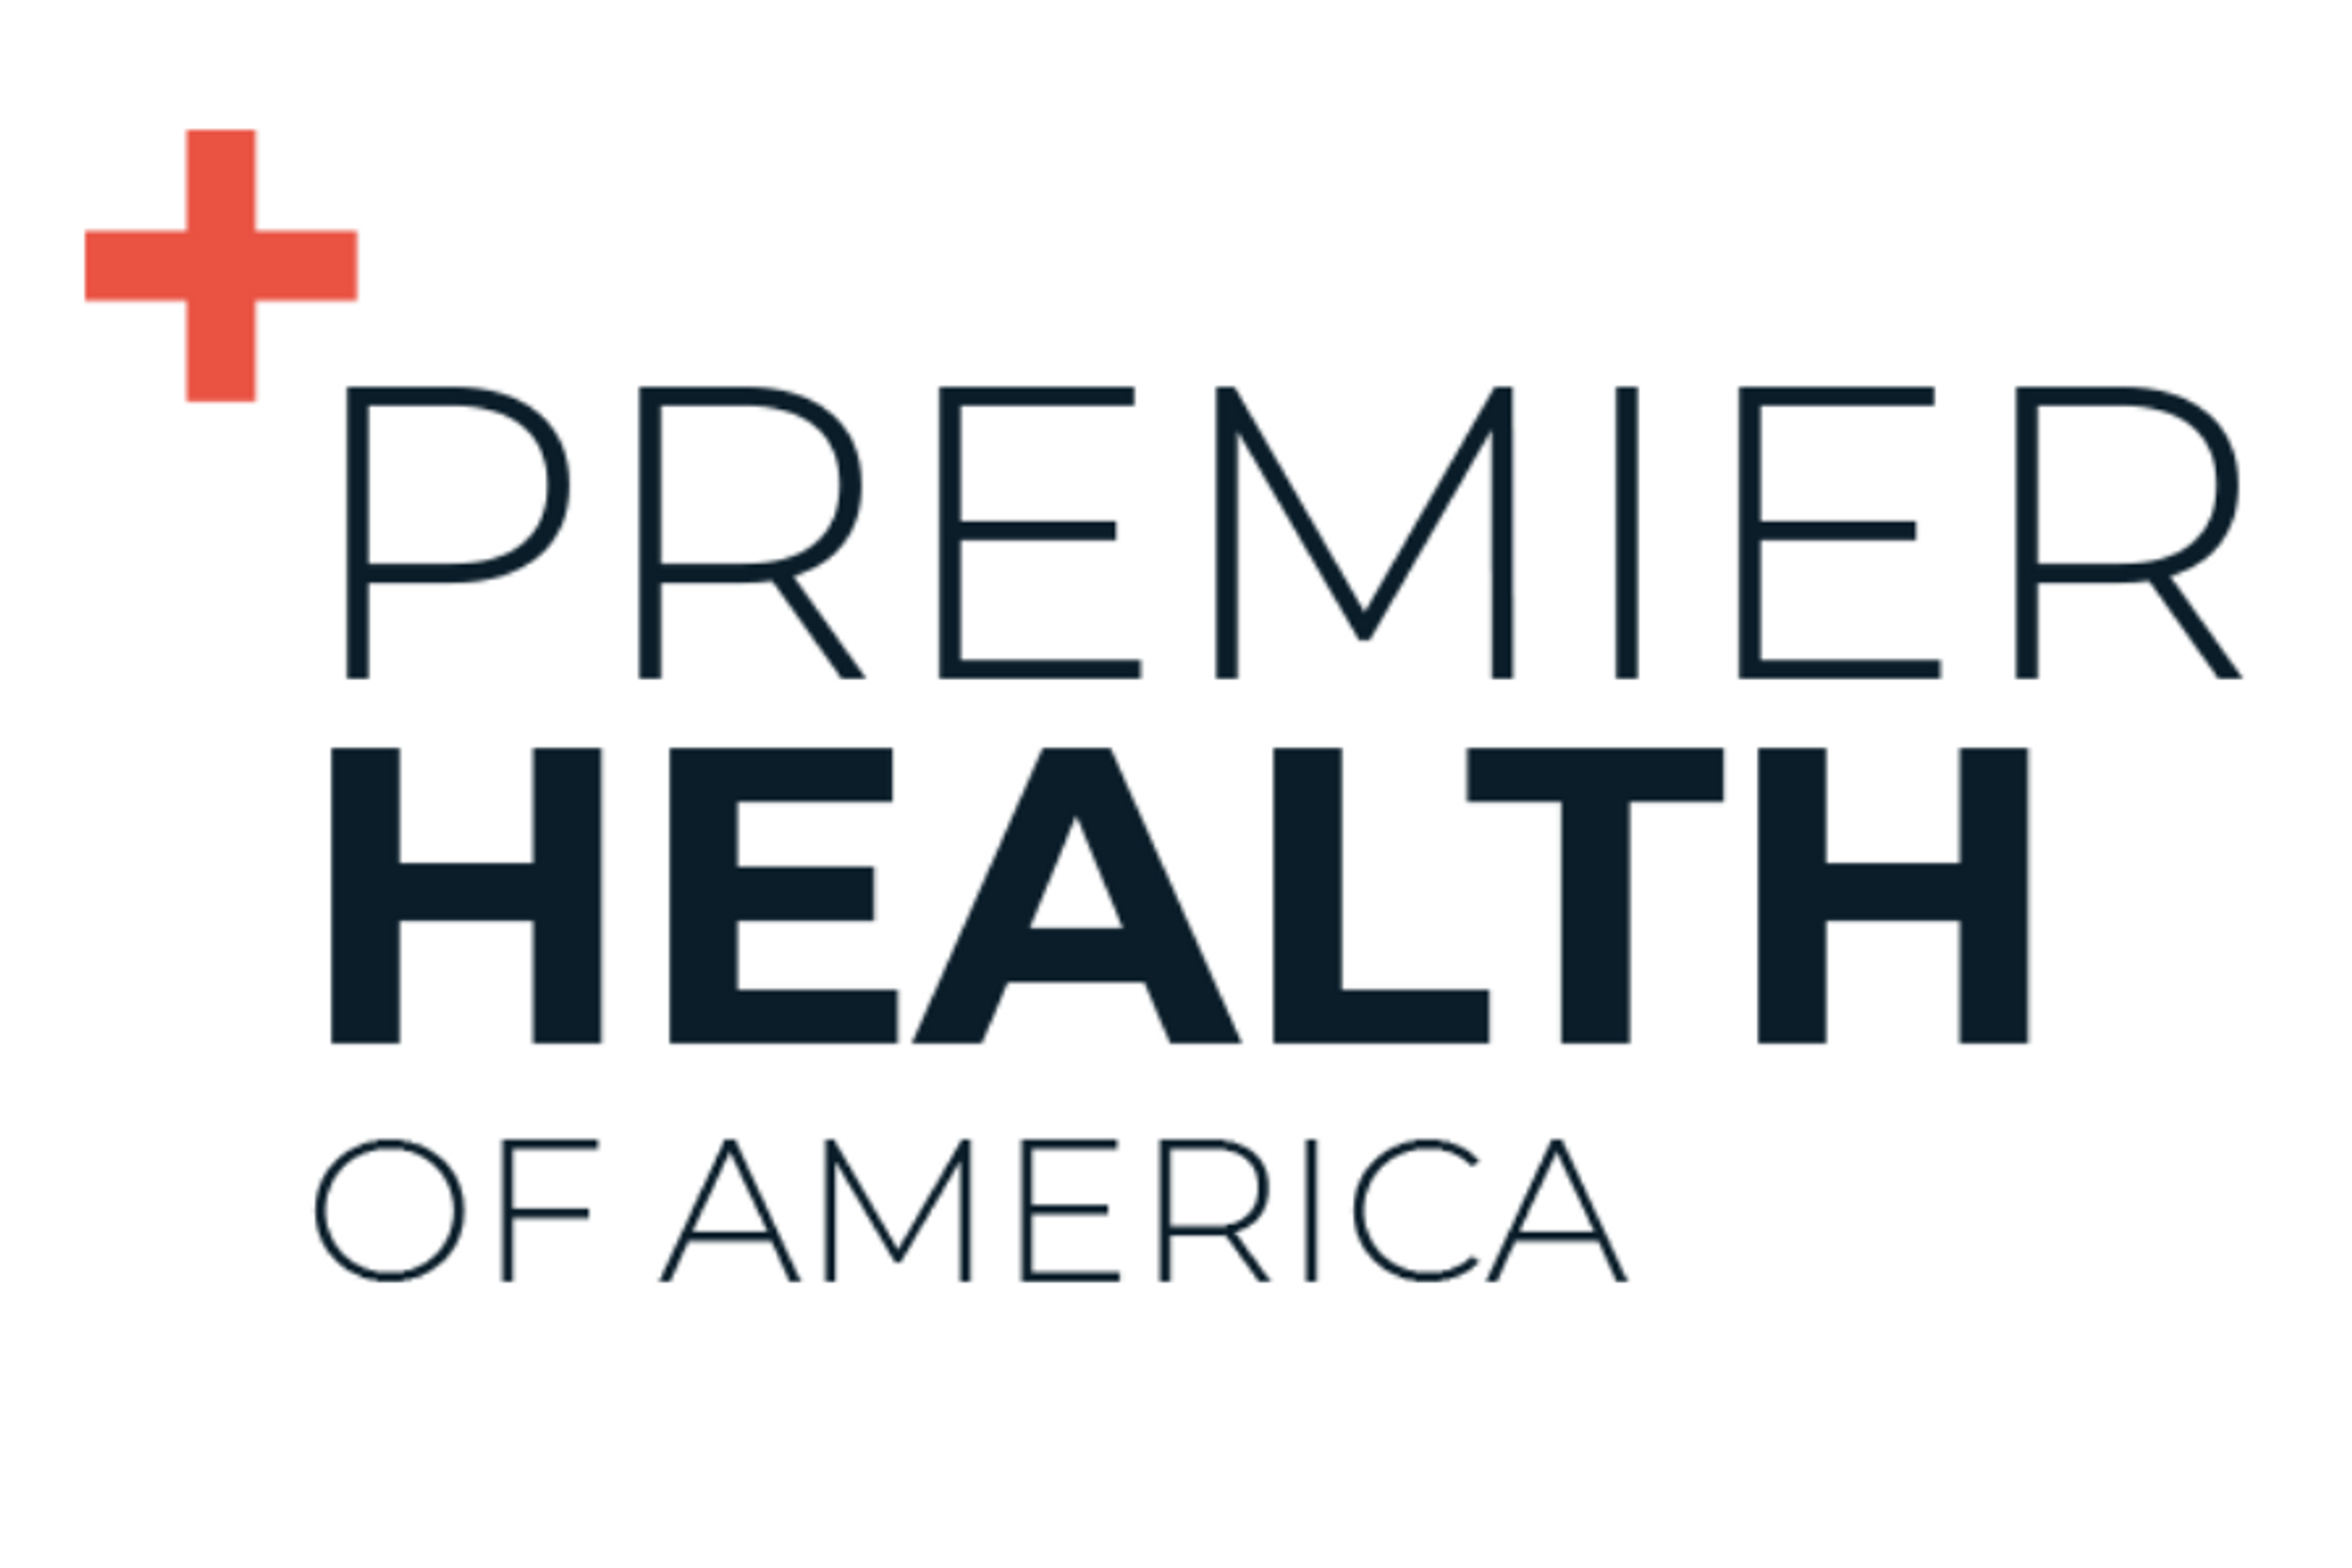 Premier Health Completes the Previously Announced Acquisition of Canadian Health Care Agency